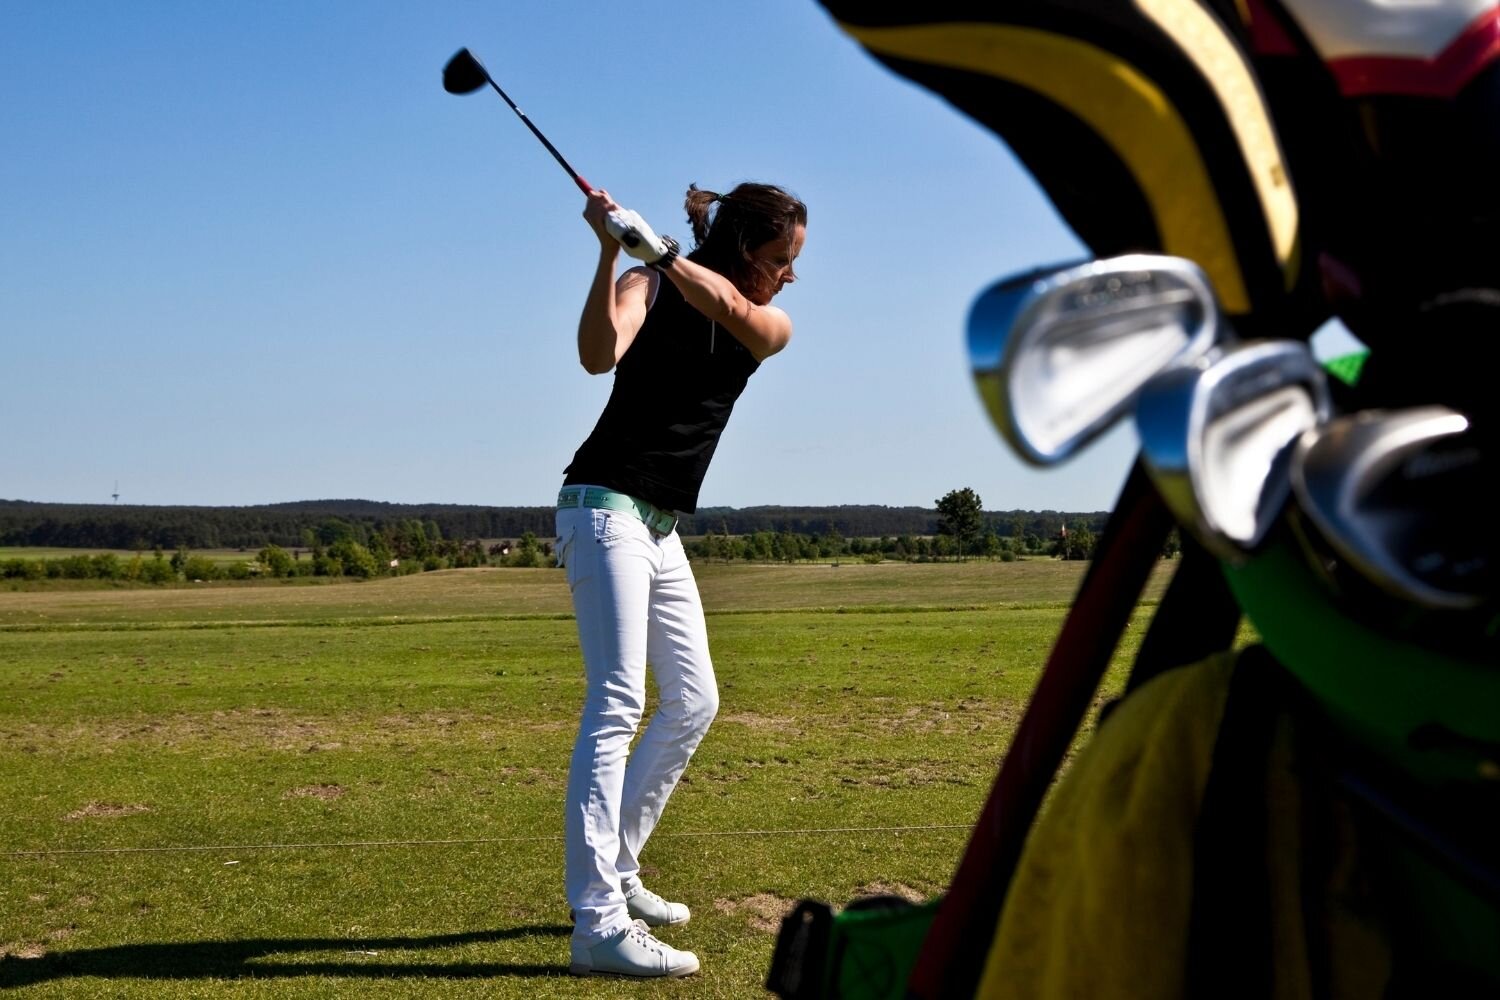 Female golfer hitting golf ball with bag of clubs nearby